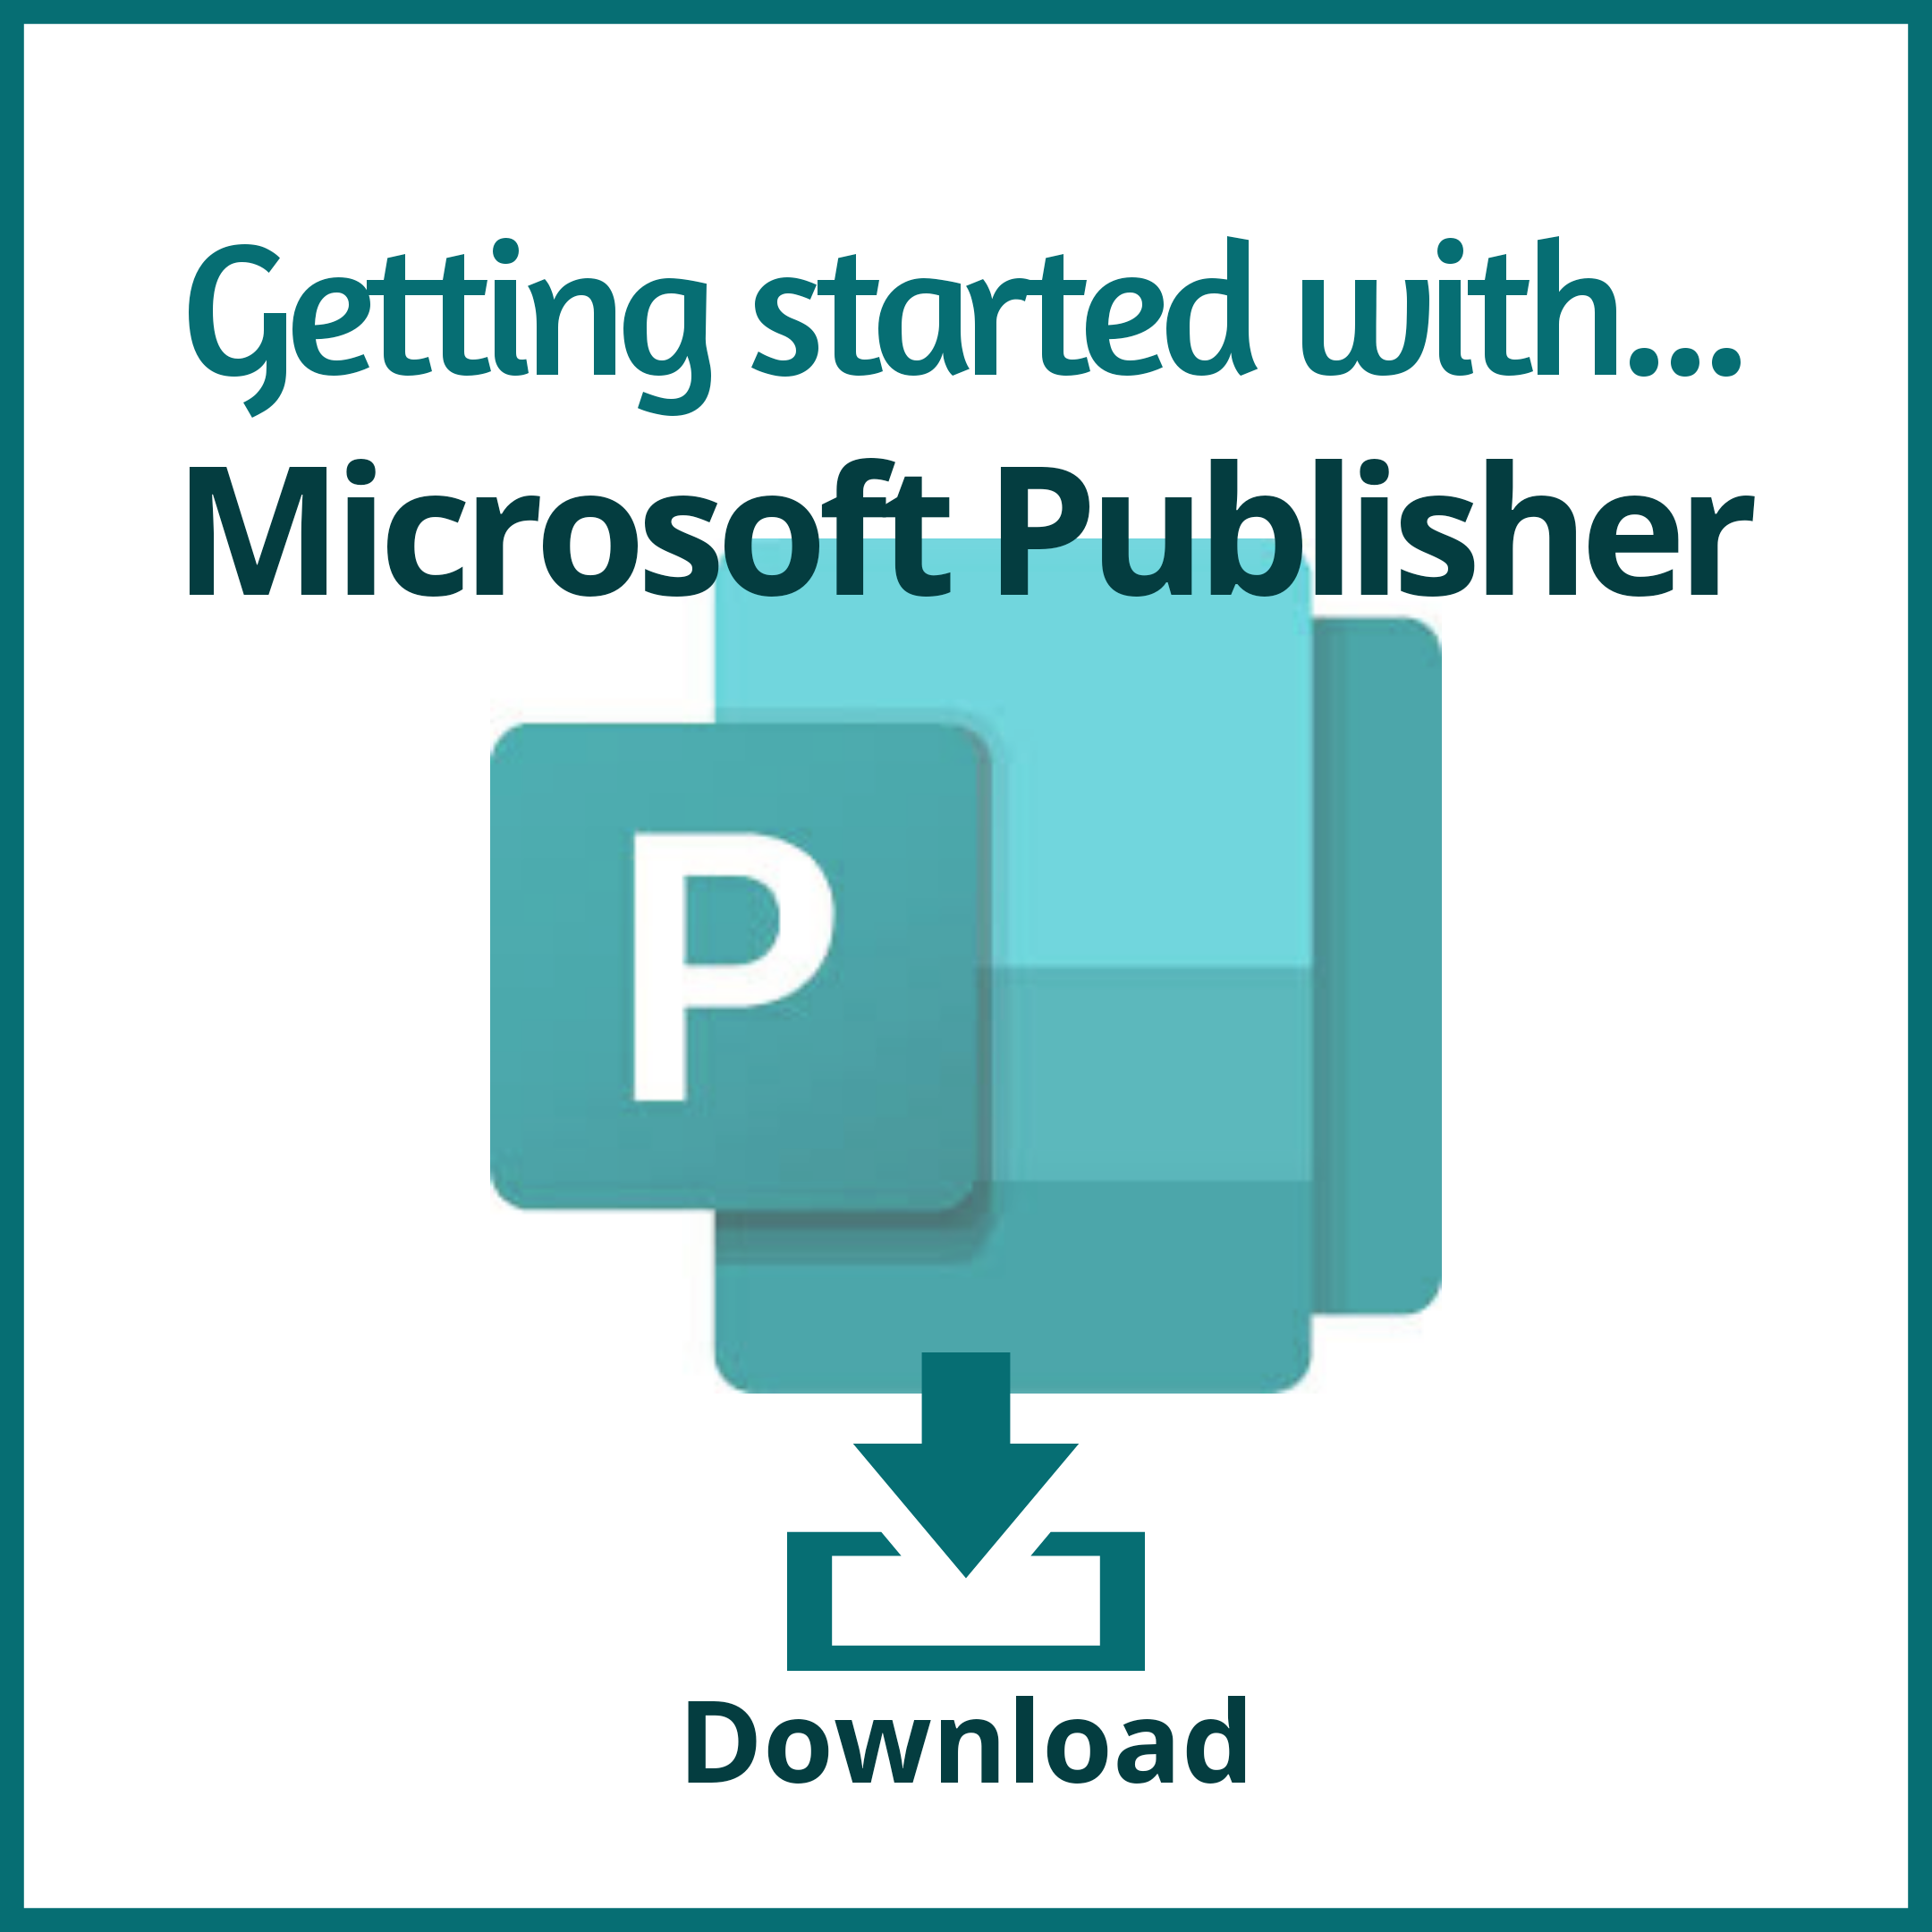 Getting started with Microsoft Publisher